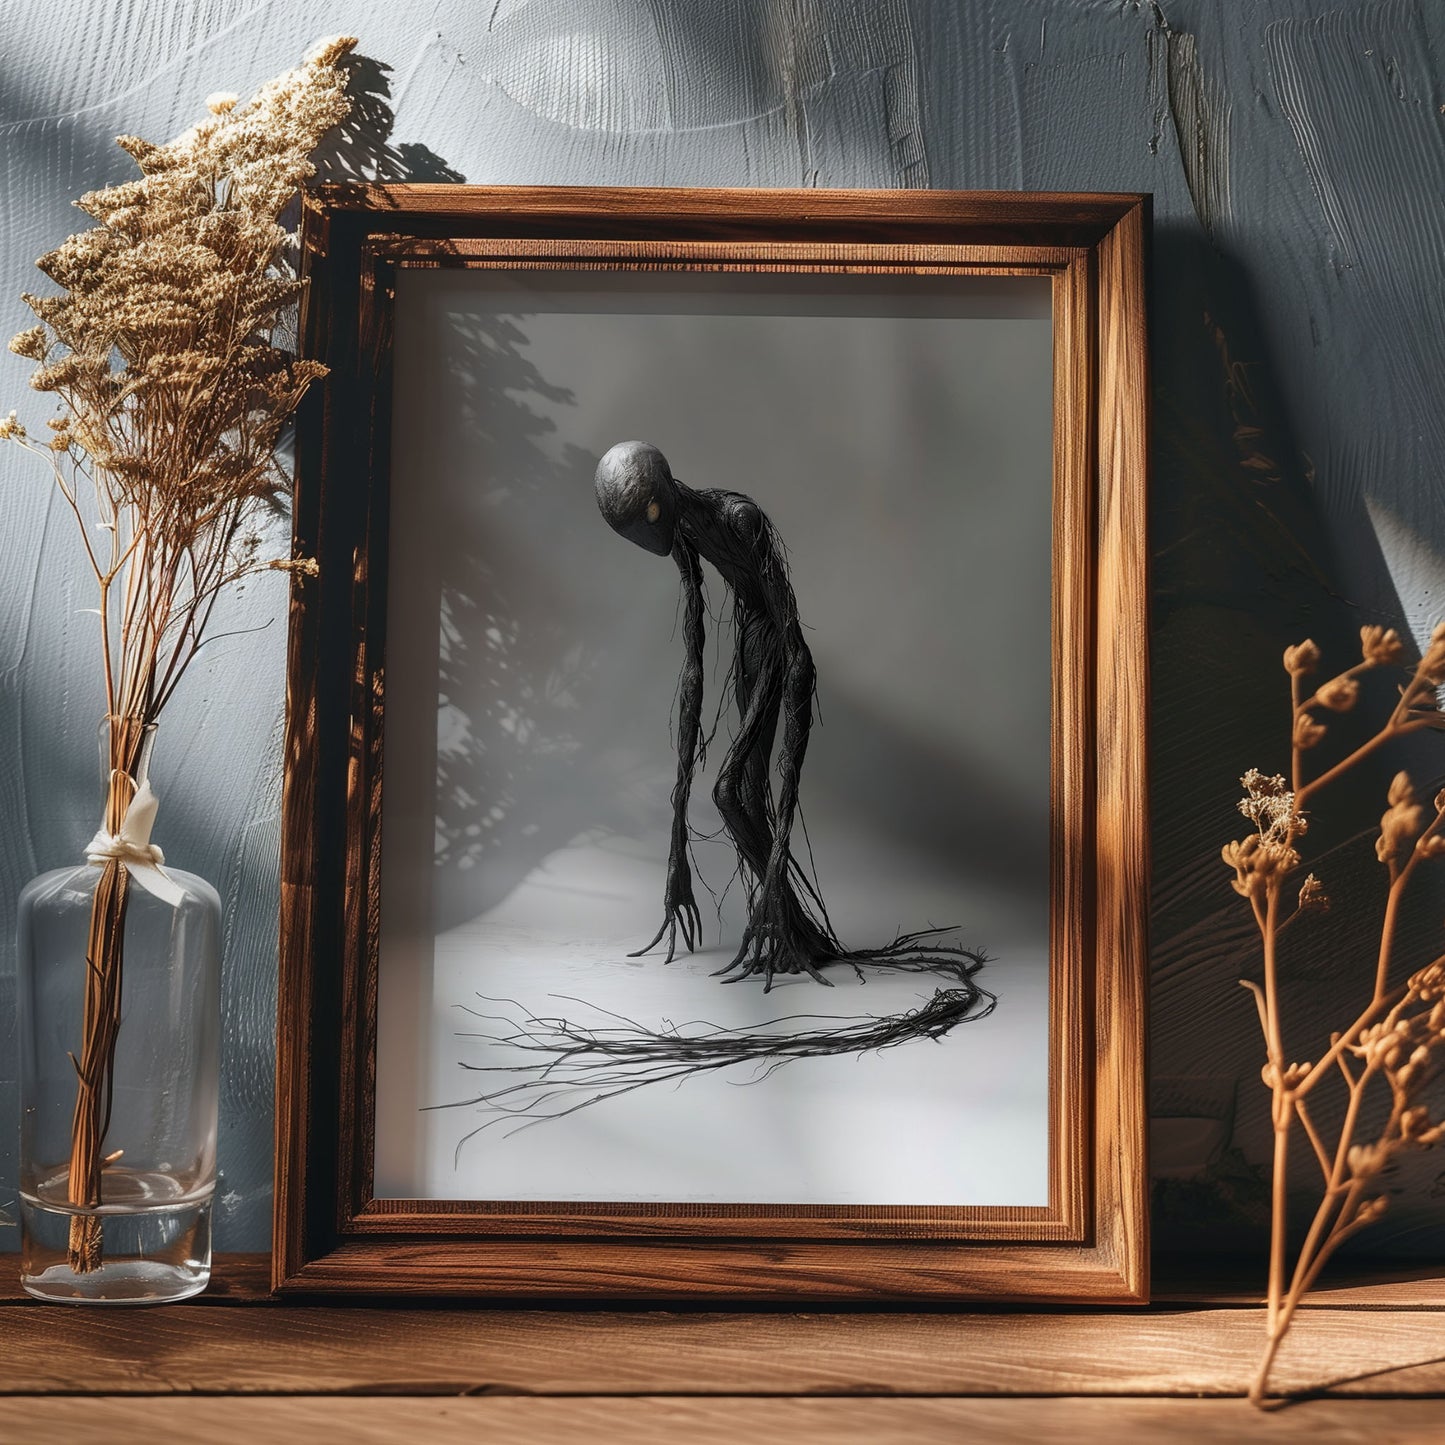 Slender Rope Monster Hunched Over - Creepy Print for Spooky Wall Art